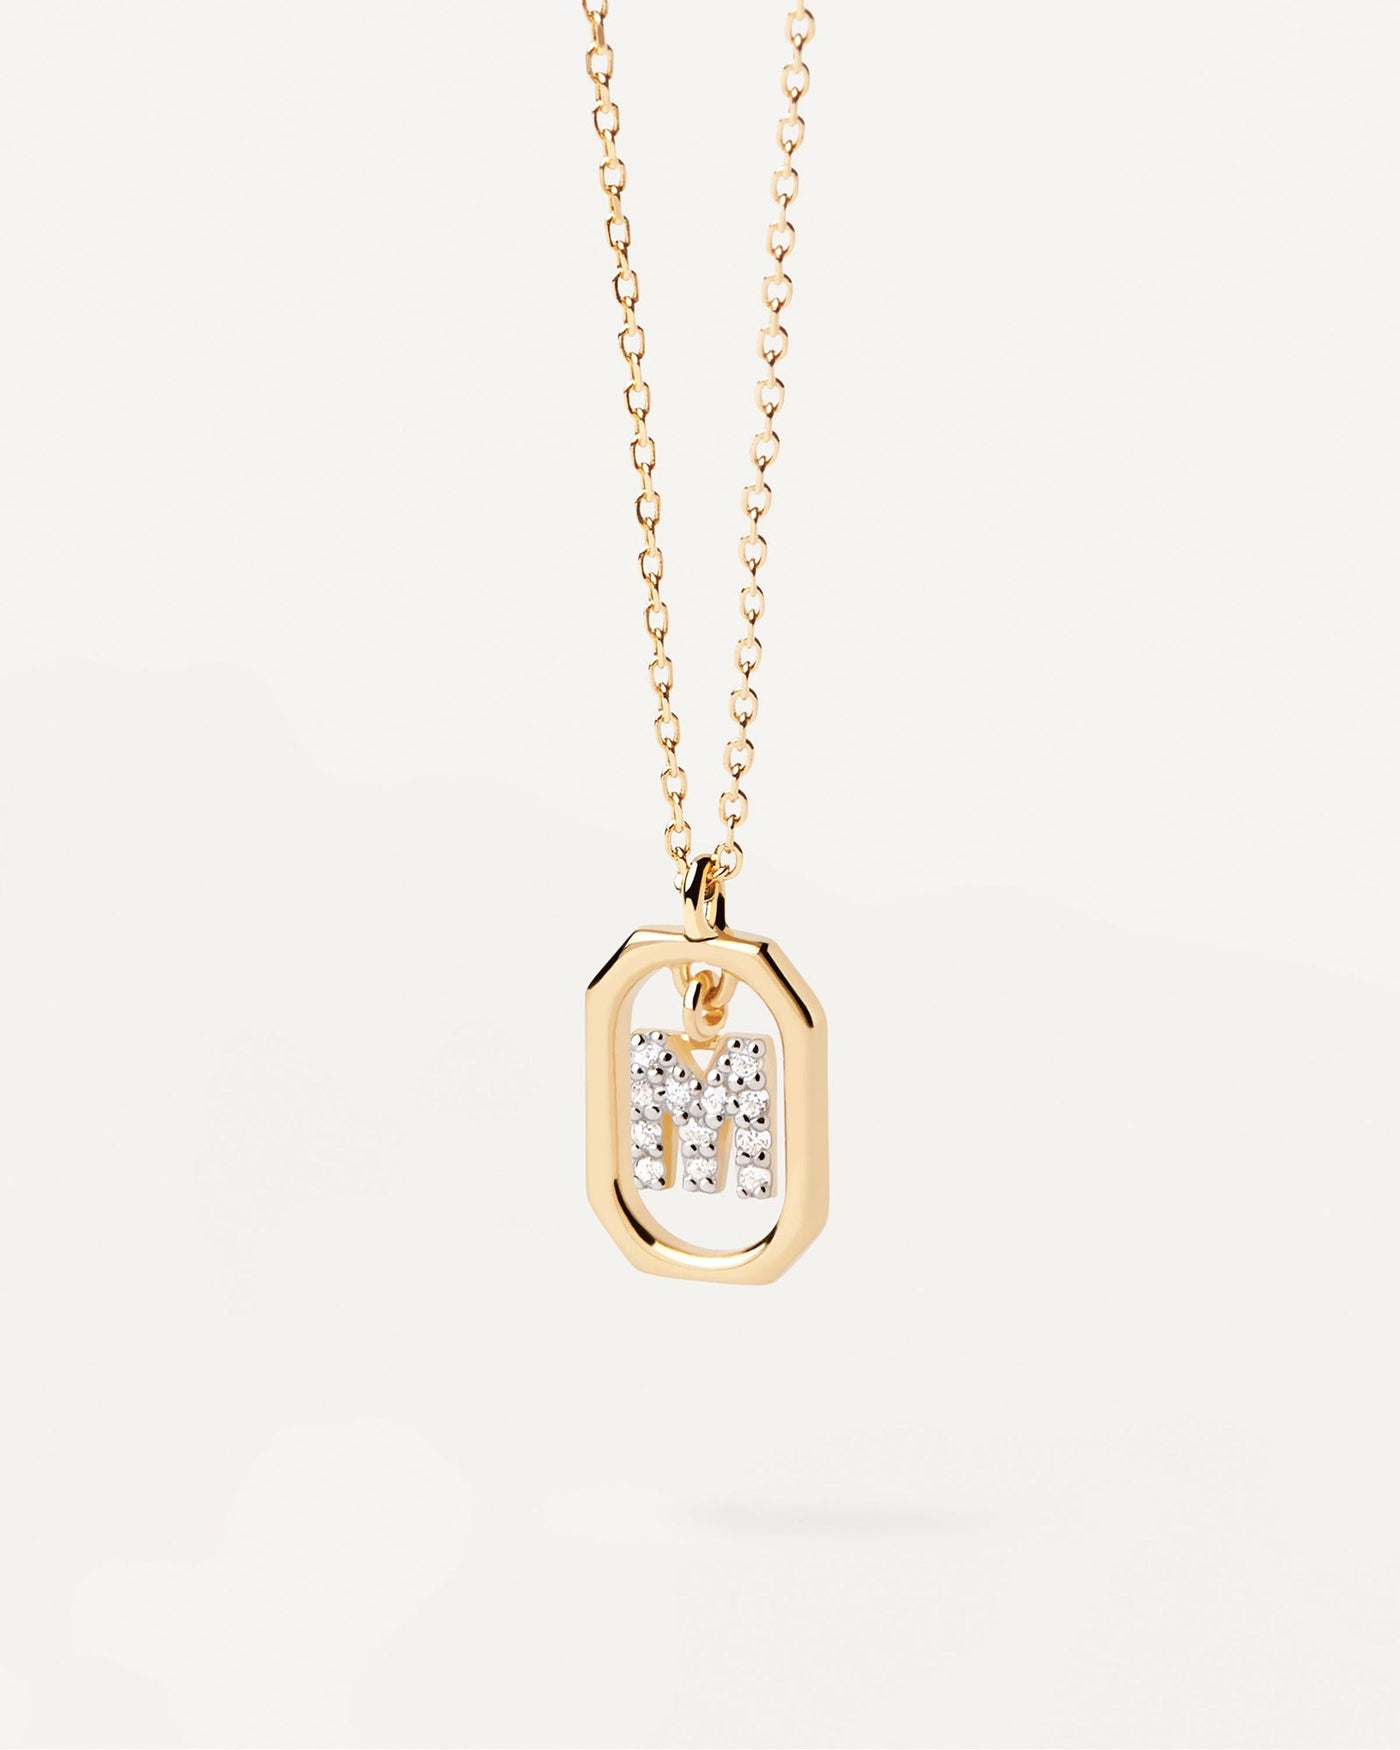 2024 Selection | Mini Letter M Necklace. Small initial M necklace in zirconia inside gold-plated silver octagonal pendant. Get the latest arrival from PDPAOLA. Place your order safely and get this Best Seller. Free Shipping.